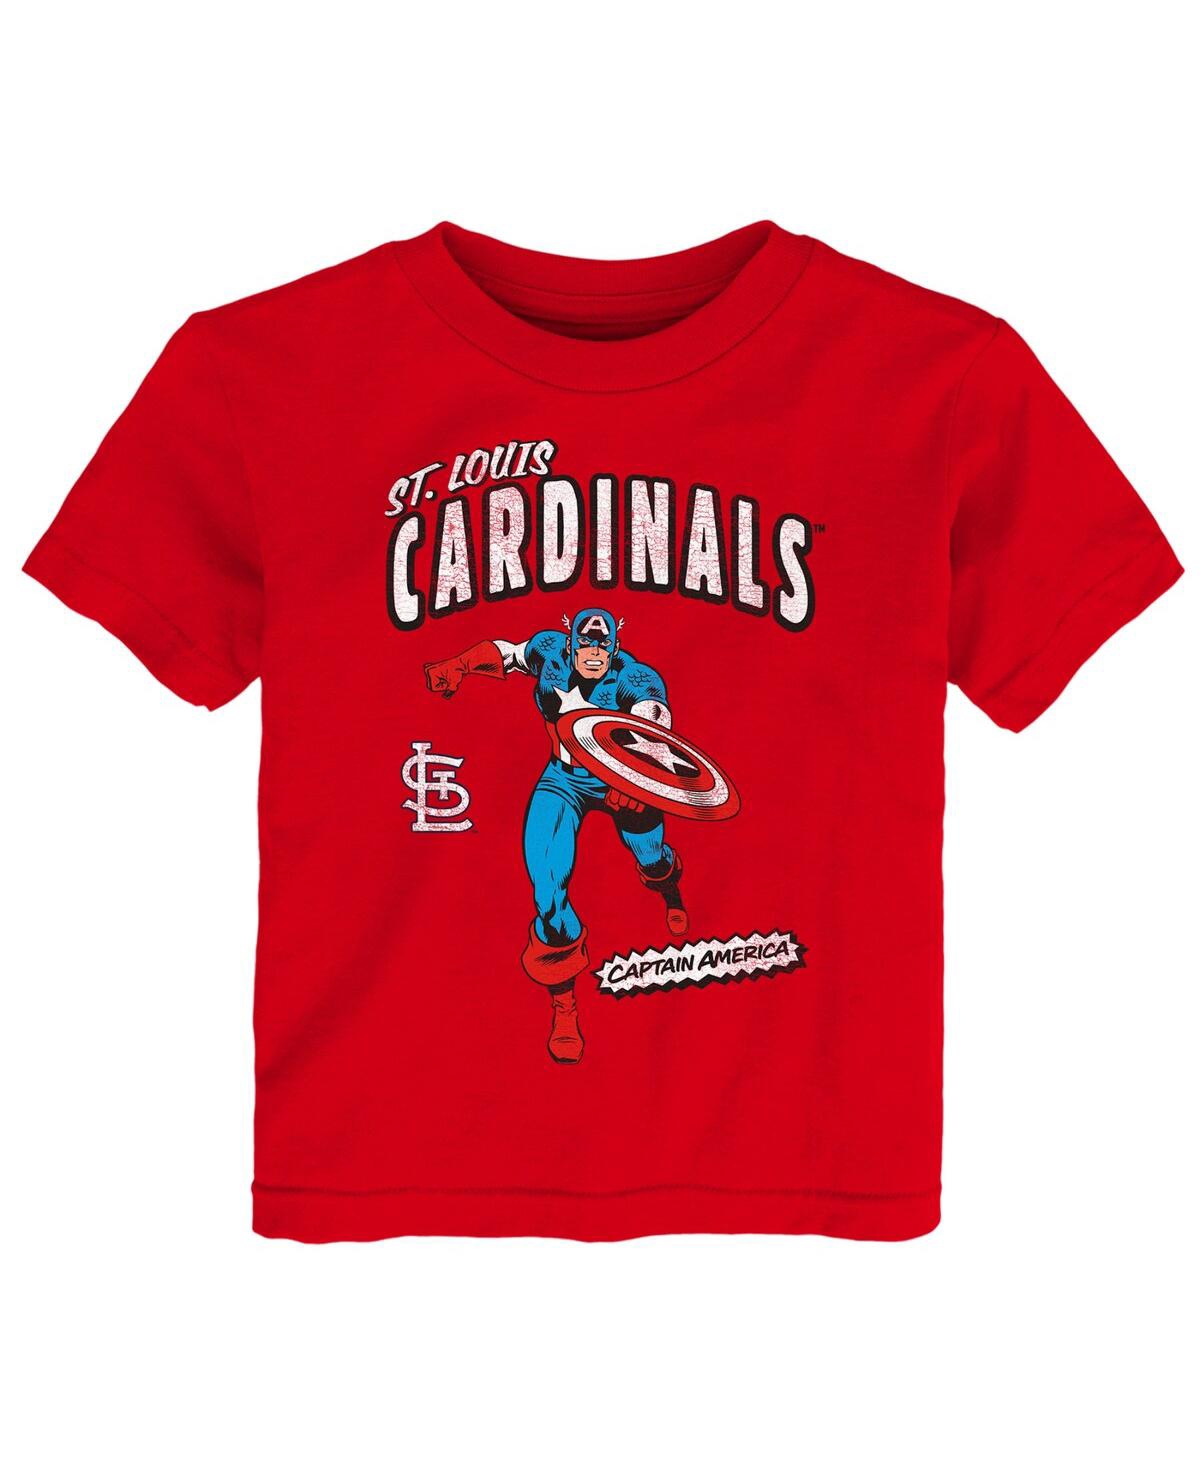 Shop Outerstuff Toddler Boys And Girls Red St. Louis Cardinals Team Captain America Marvel T-shirt